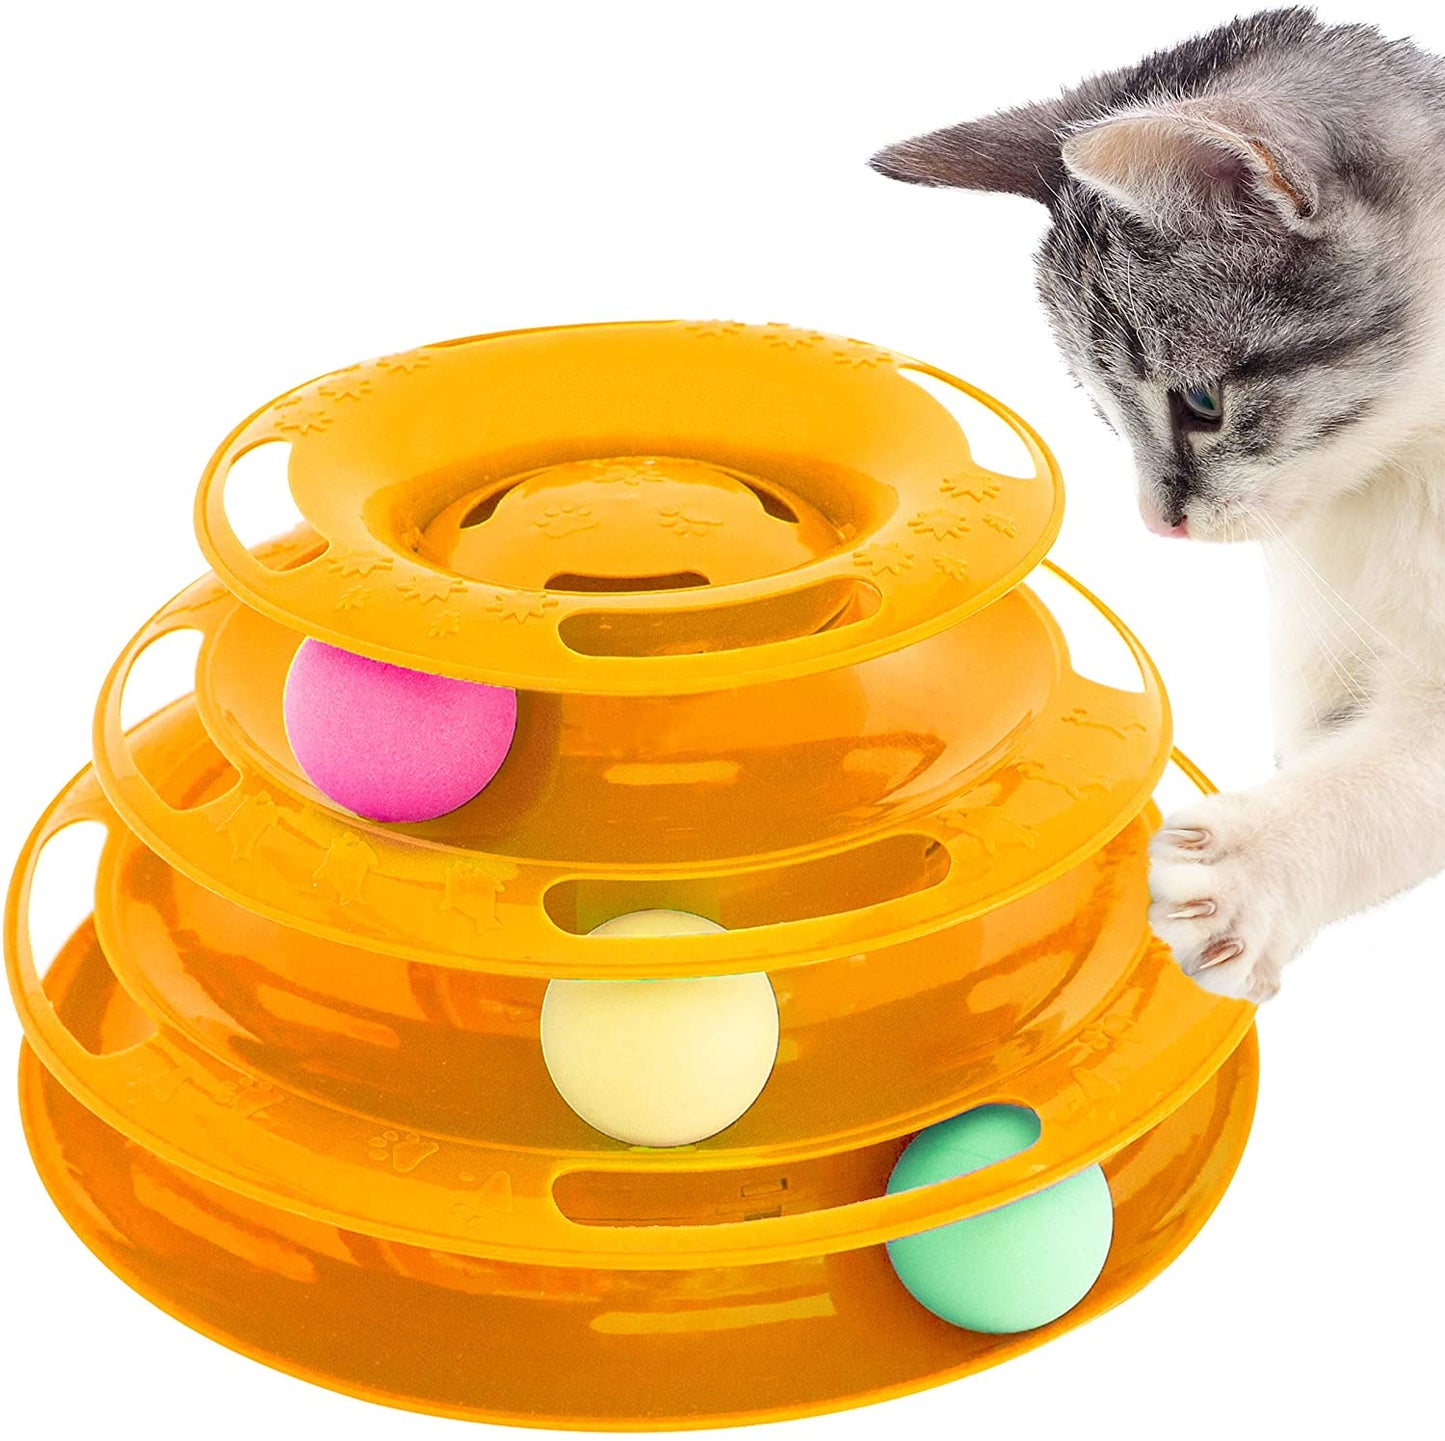 Purrfect Feline Titan's Tower - Interactive Cat Ball Toy